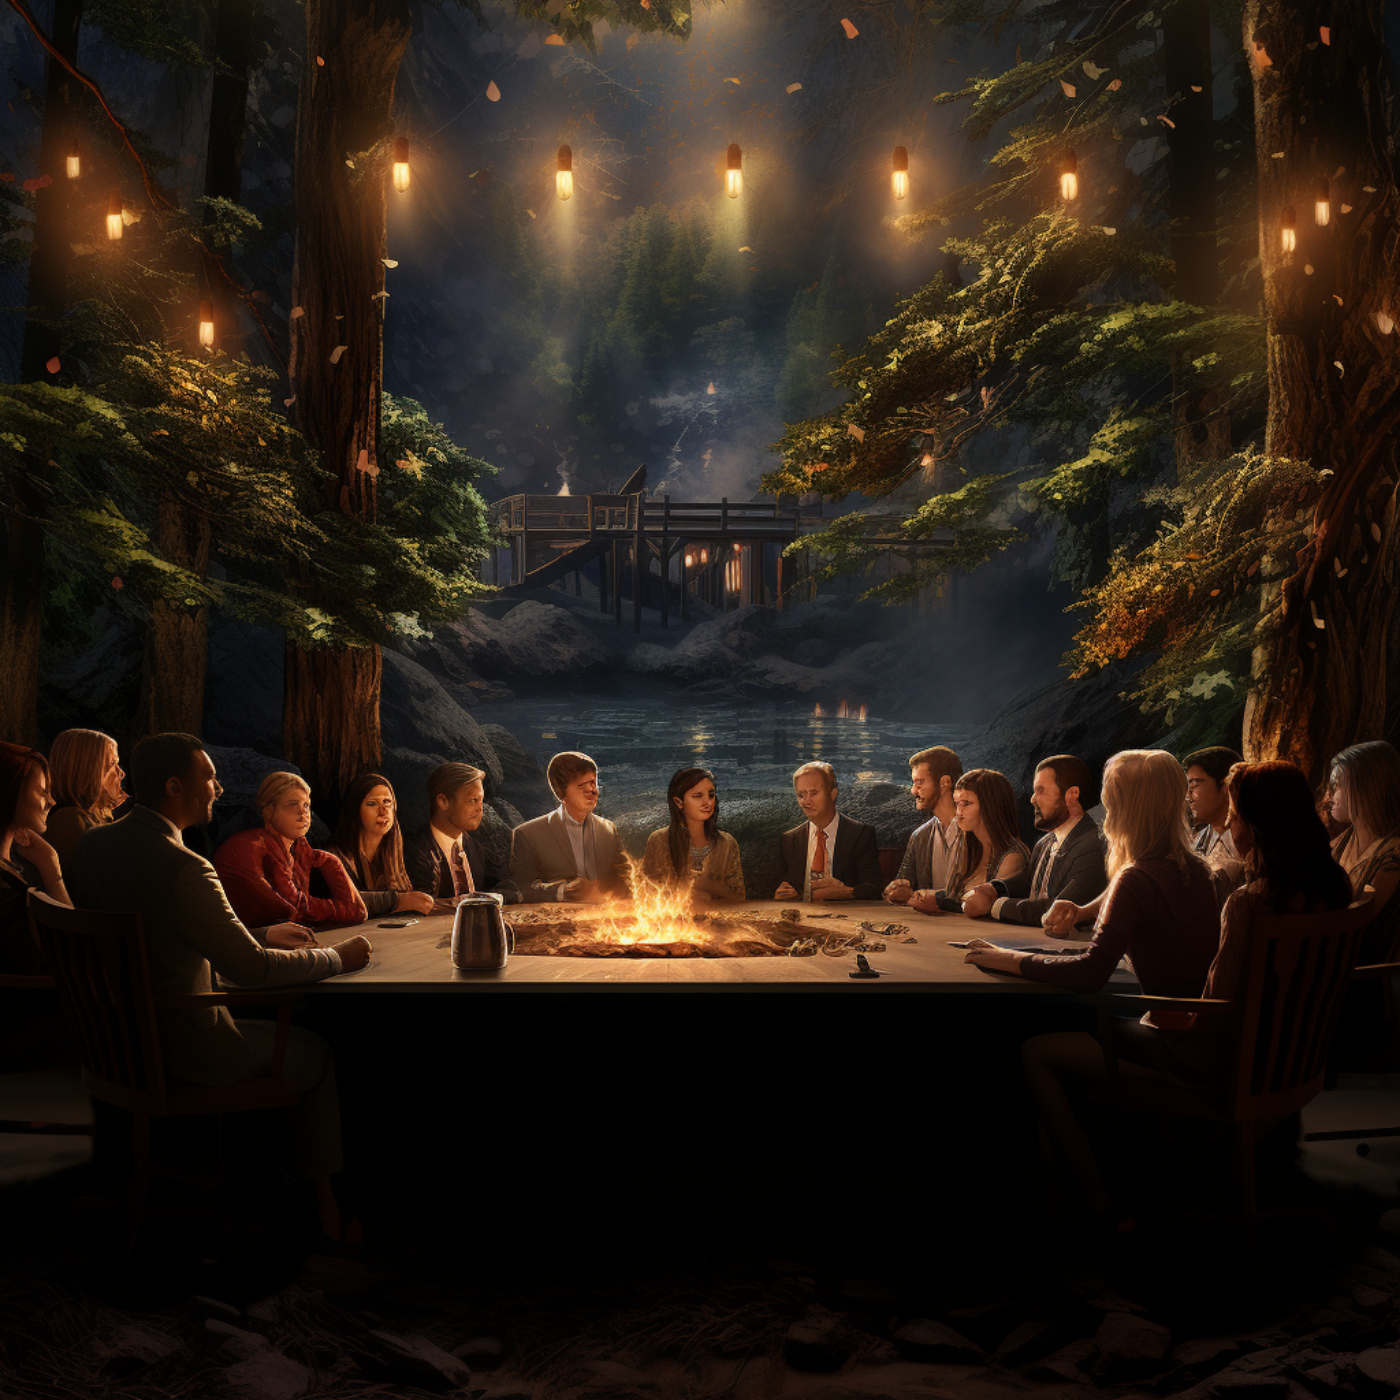 A photorealistic hyperrealistic group of thirty diverse faculty, students and staff from McMaster University wearing business casual clothes sitting a traditional wooden boardroom table debating a topic. The boardroom table is in the middle of a deciduous forest lit up by fairy lights with a small campfire burning in the background.